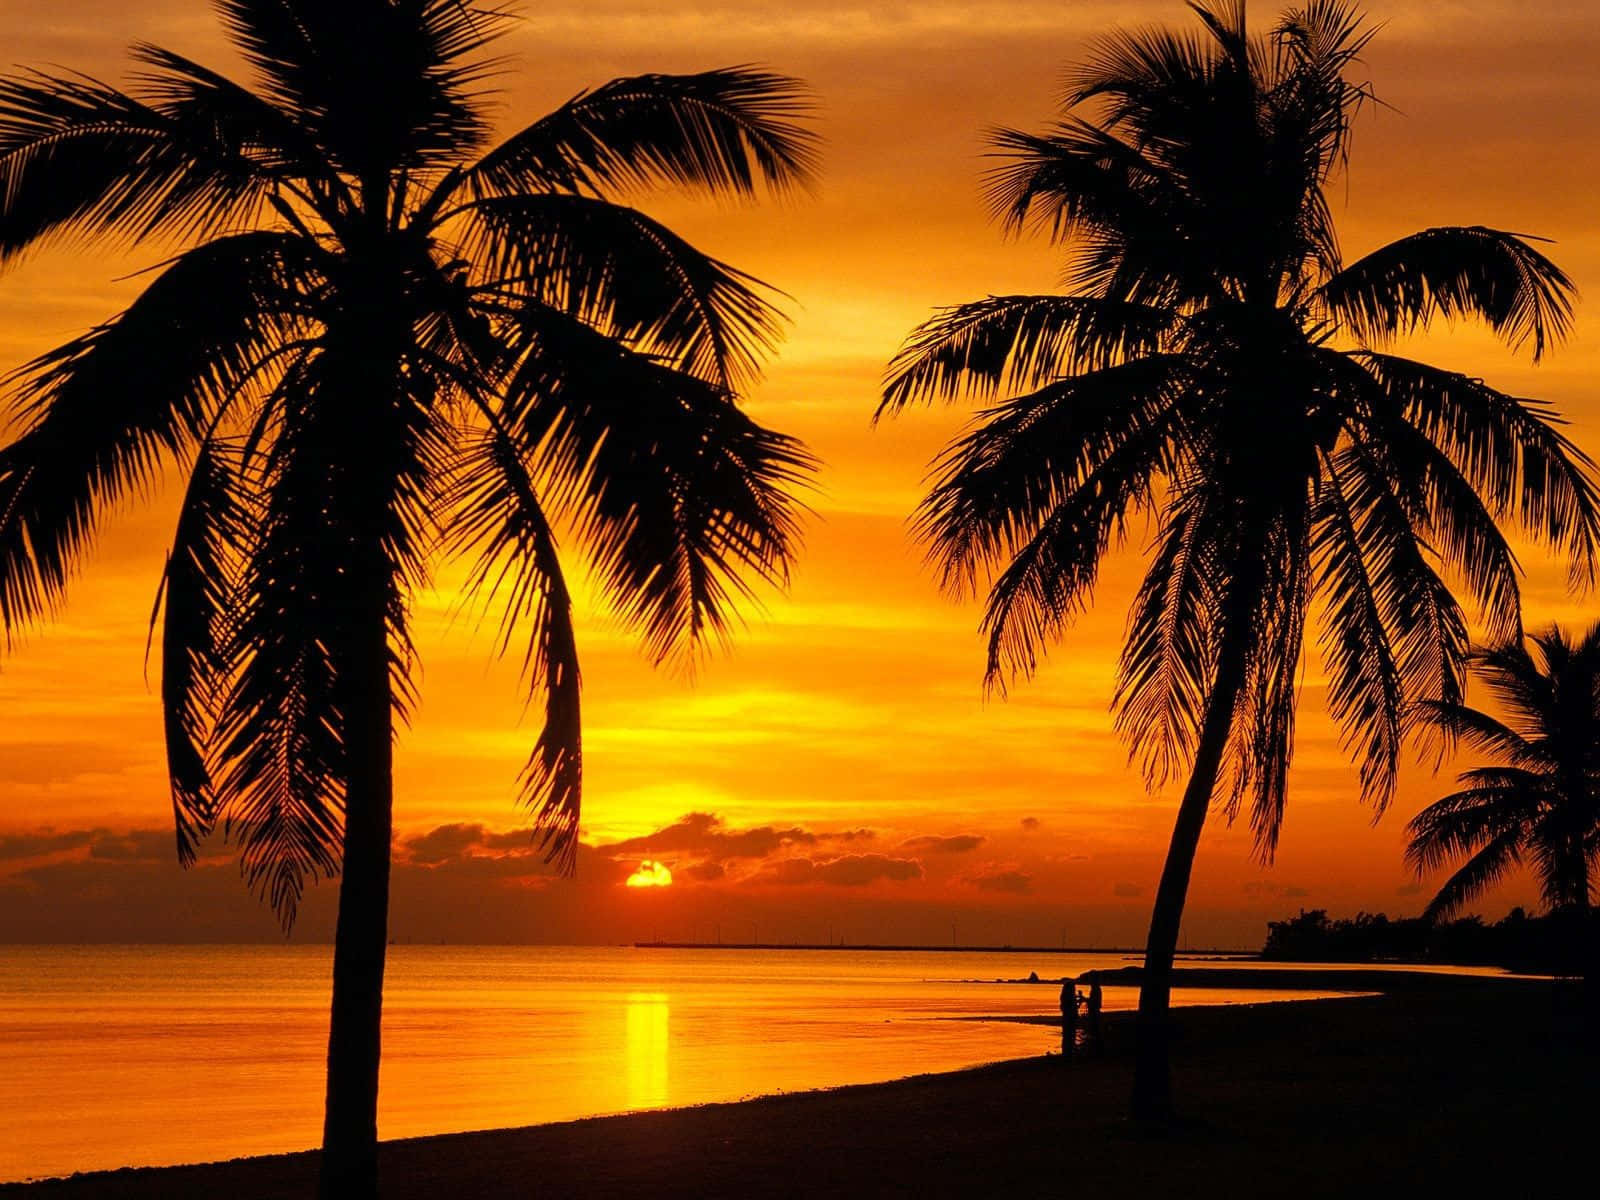 #_Sunset_View: Serene Beach and Palm Trees at Dusk_# Wallpaper